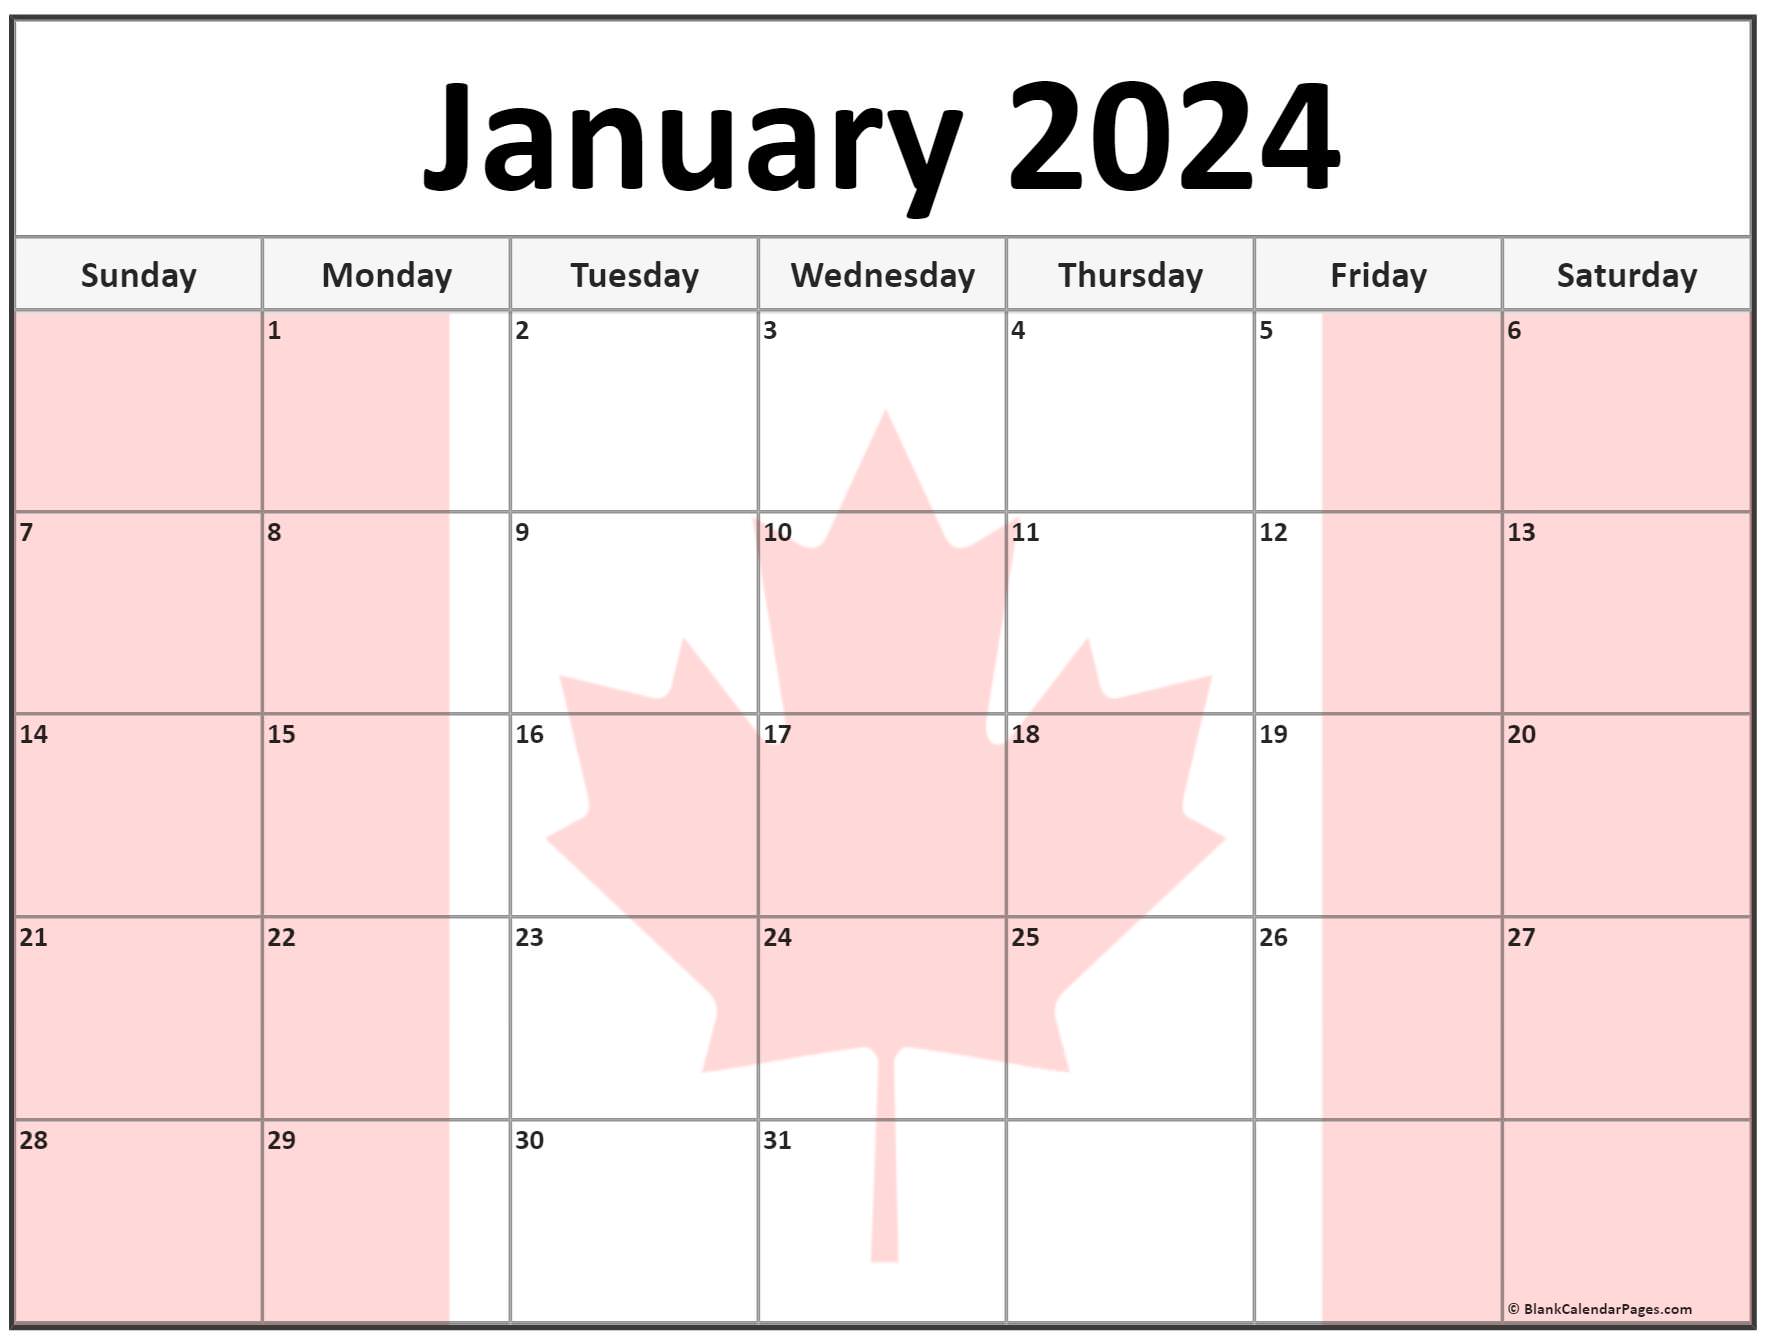 Collection of January 2023 photo calendars with image filters.